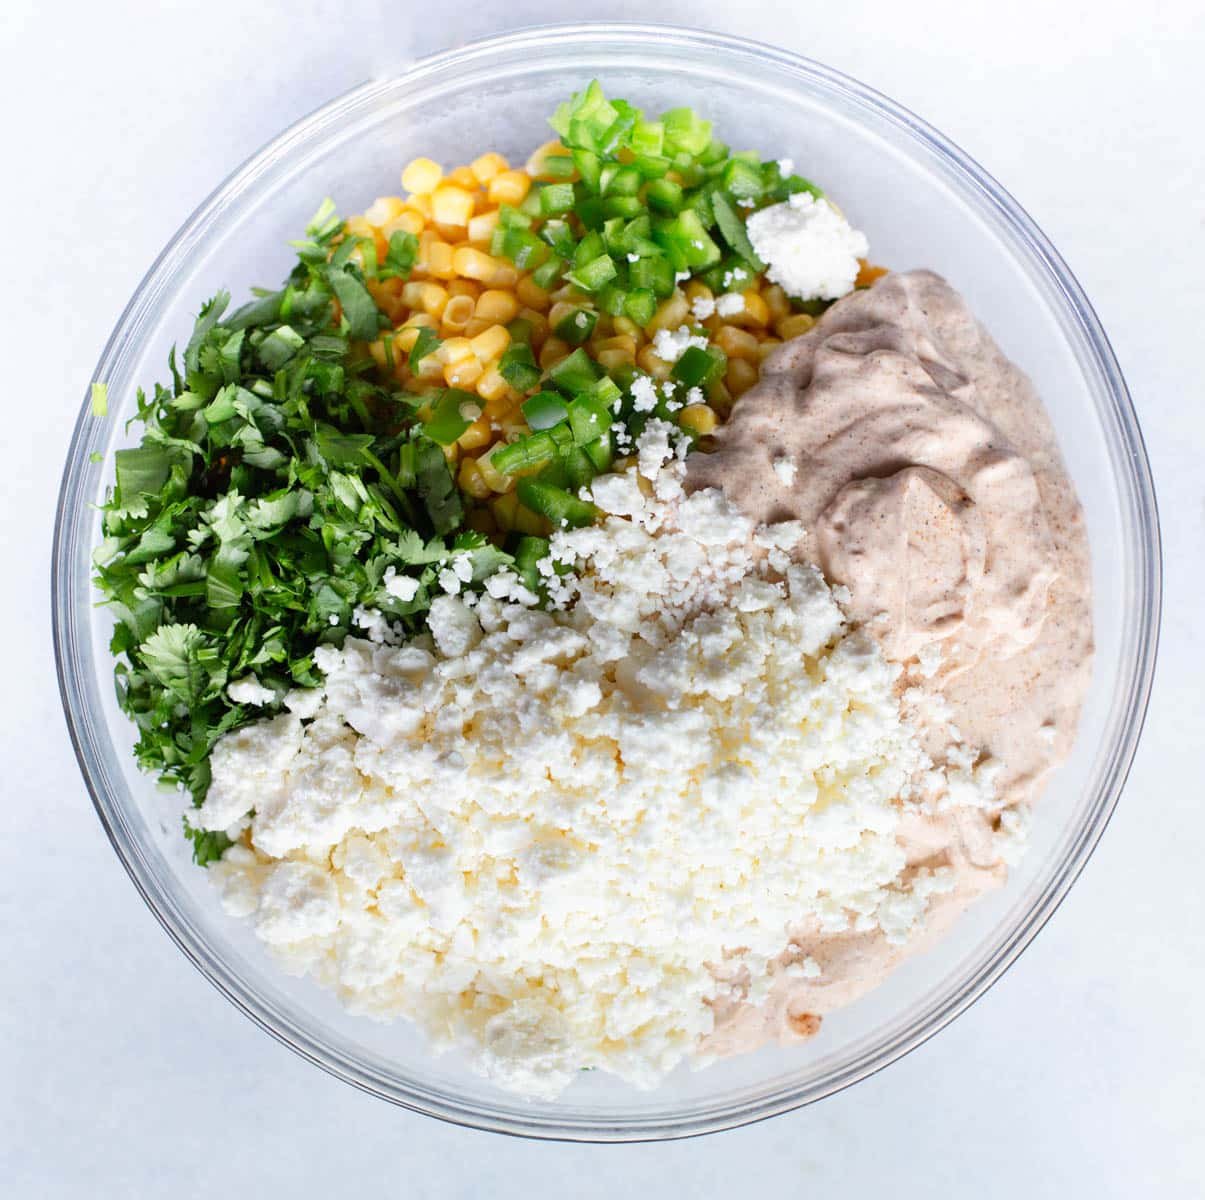 Glass bowl with corn, jalapeño, cilantro, feta cheese, and street corn dip sauce in it with a gray background.